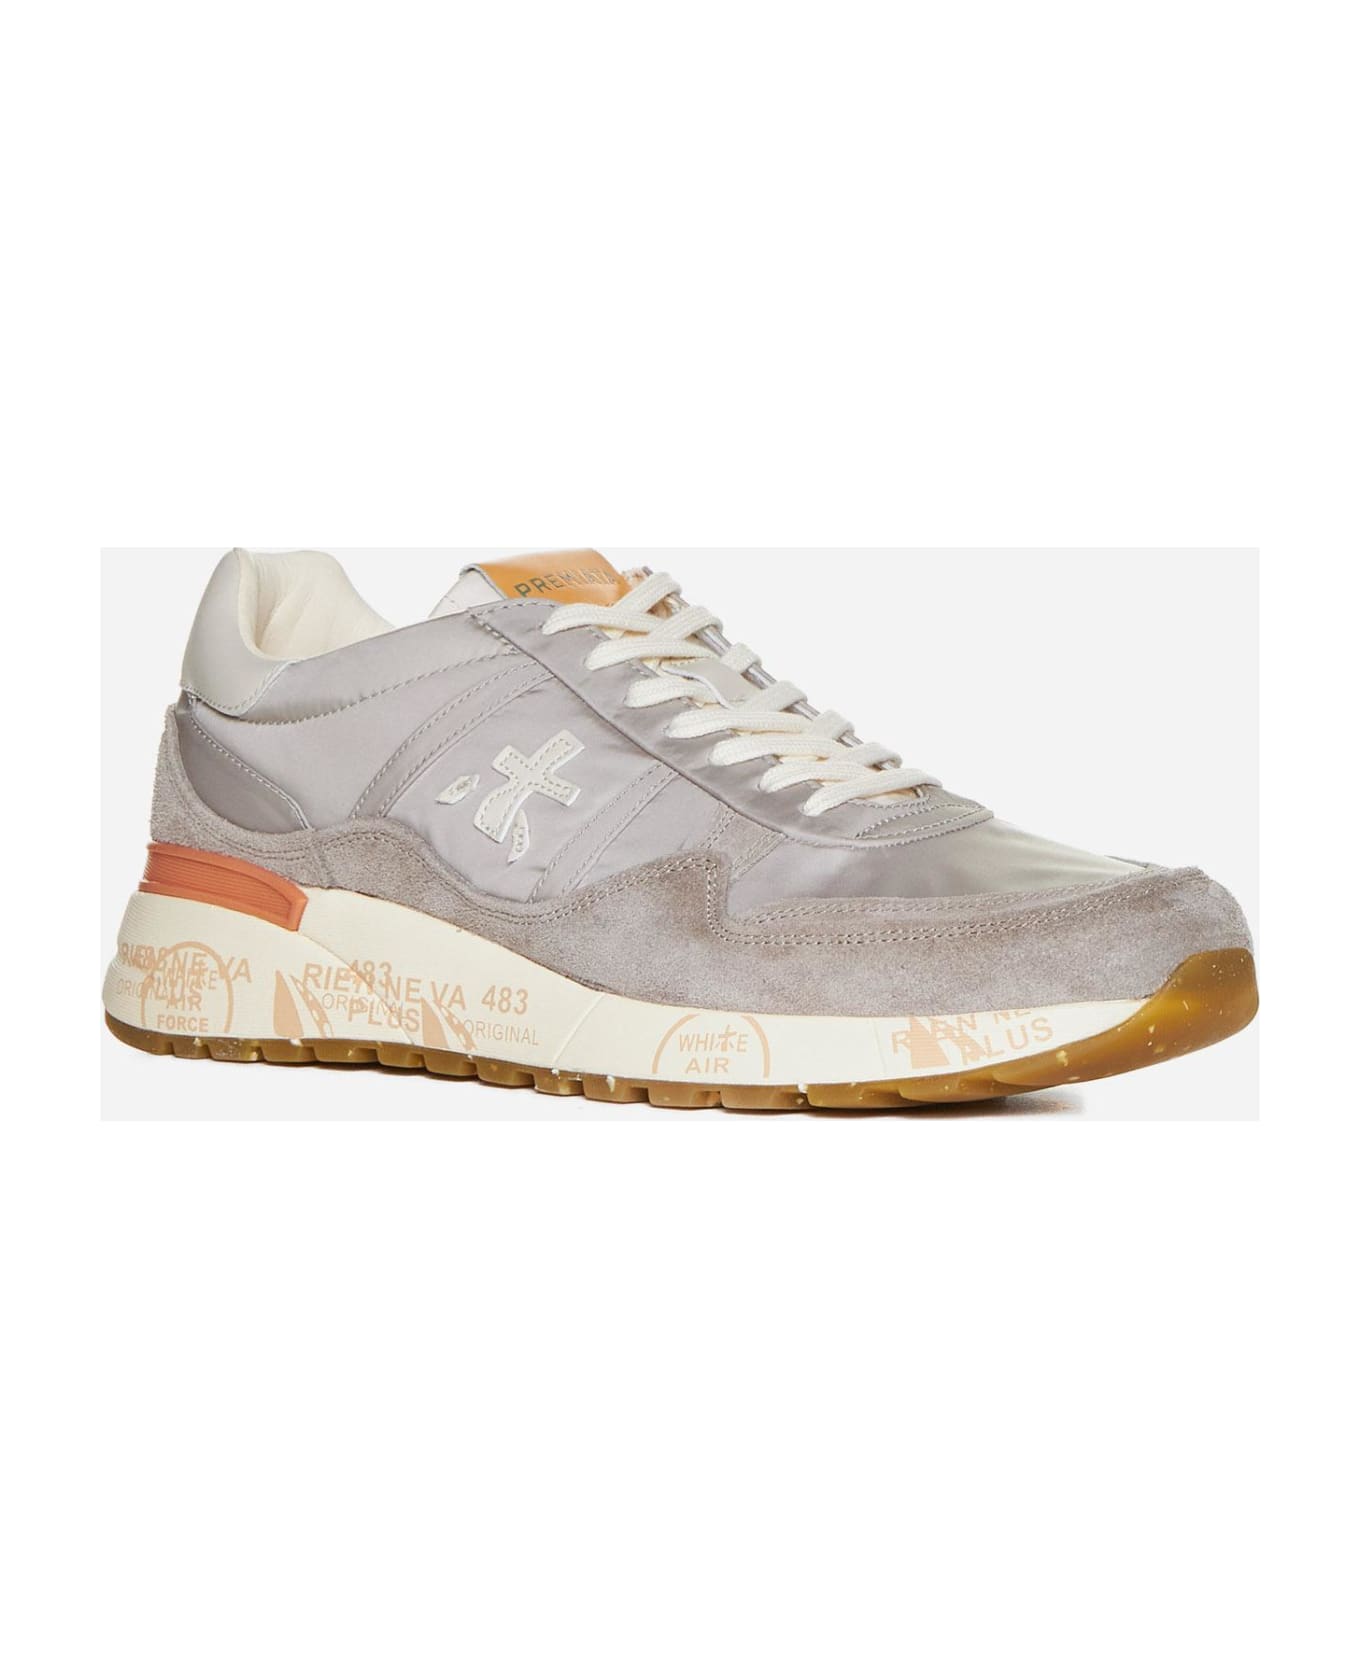 Premiata Landeck Leather, Nylon And Suede Sneakers